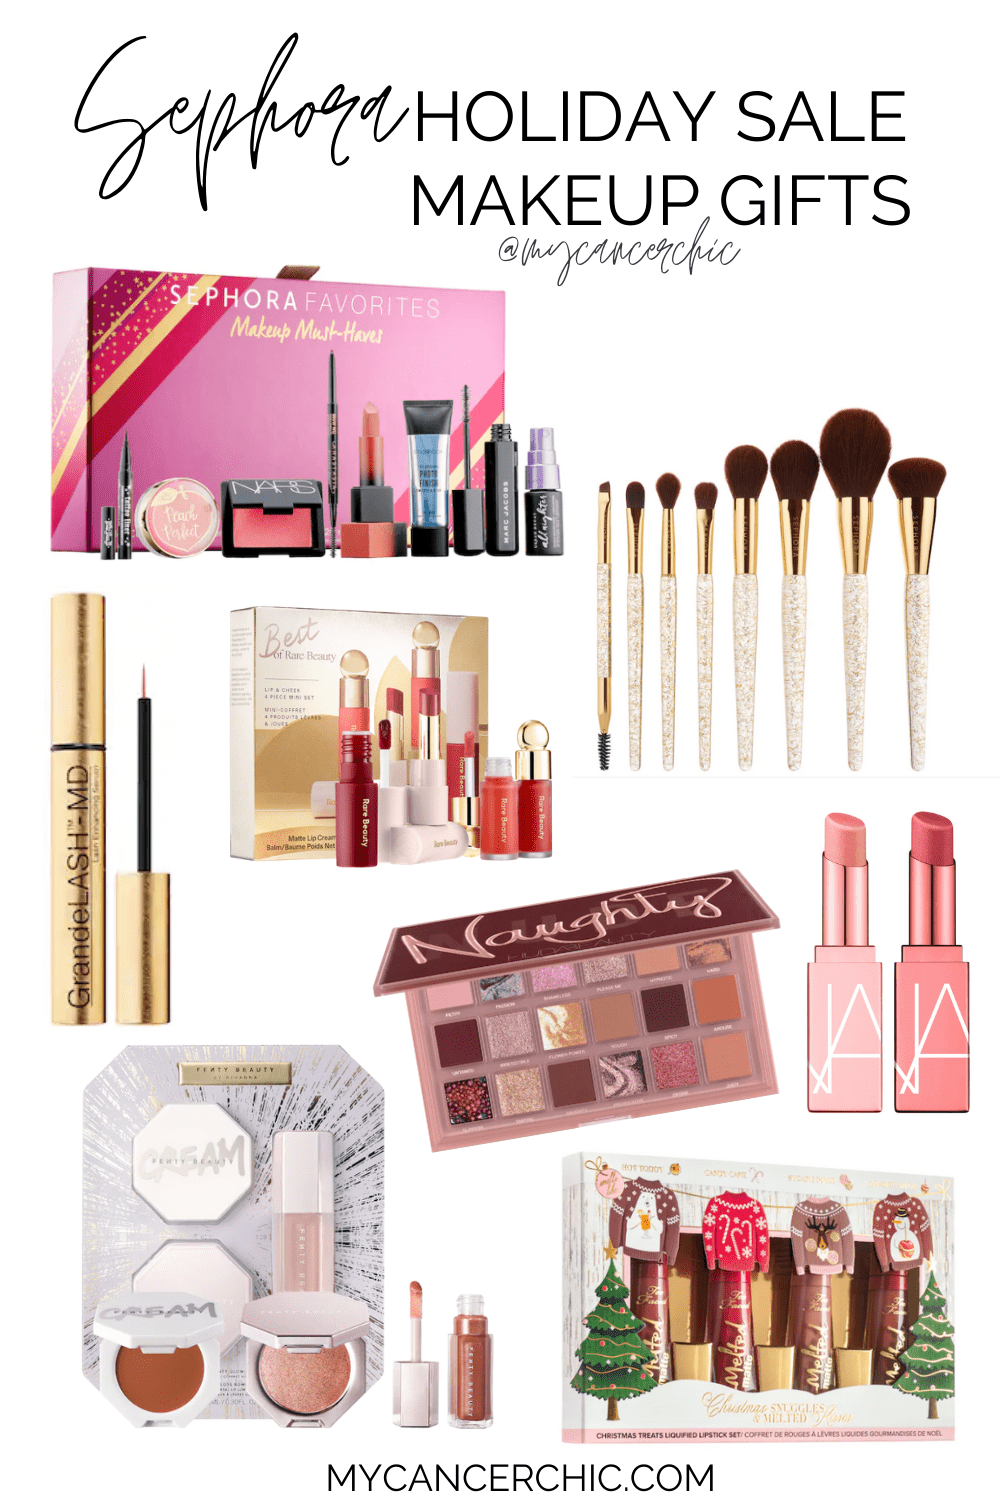 Sephora Holiday Sale Guide Stocking Stuffers, Gifts & Clean Beauty Picks